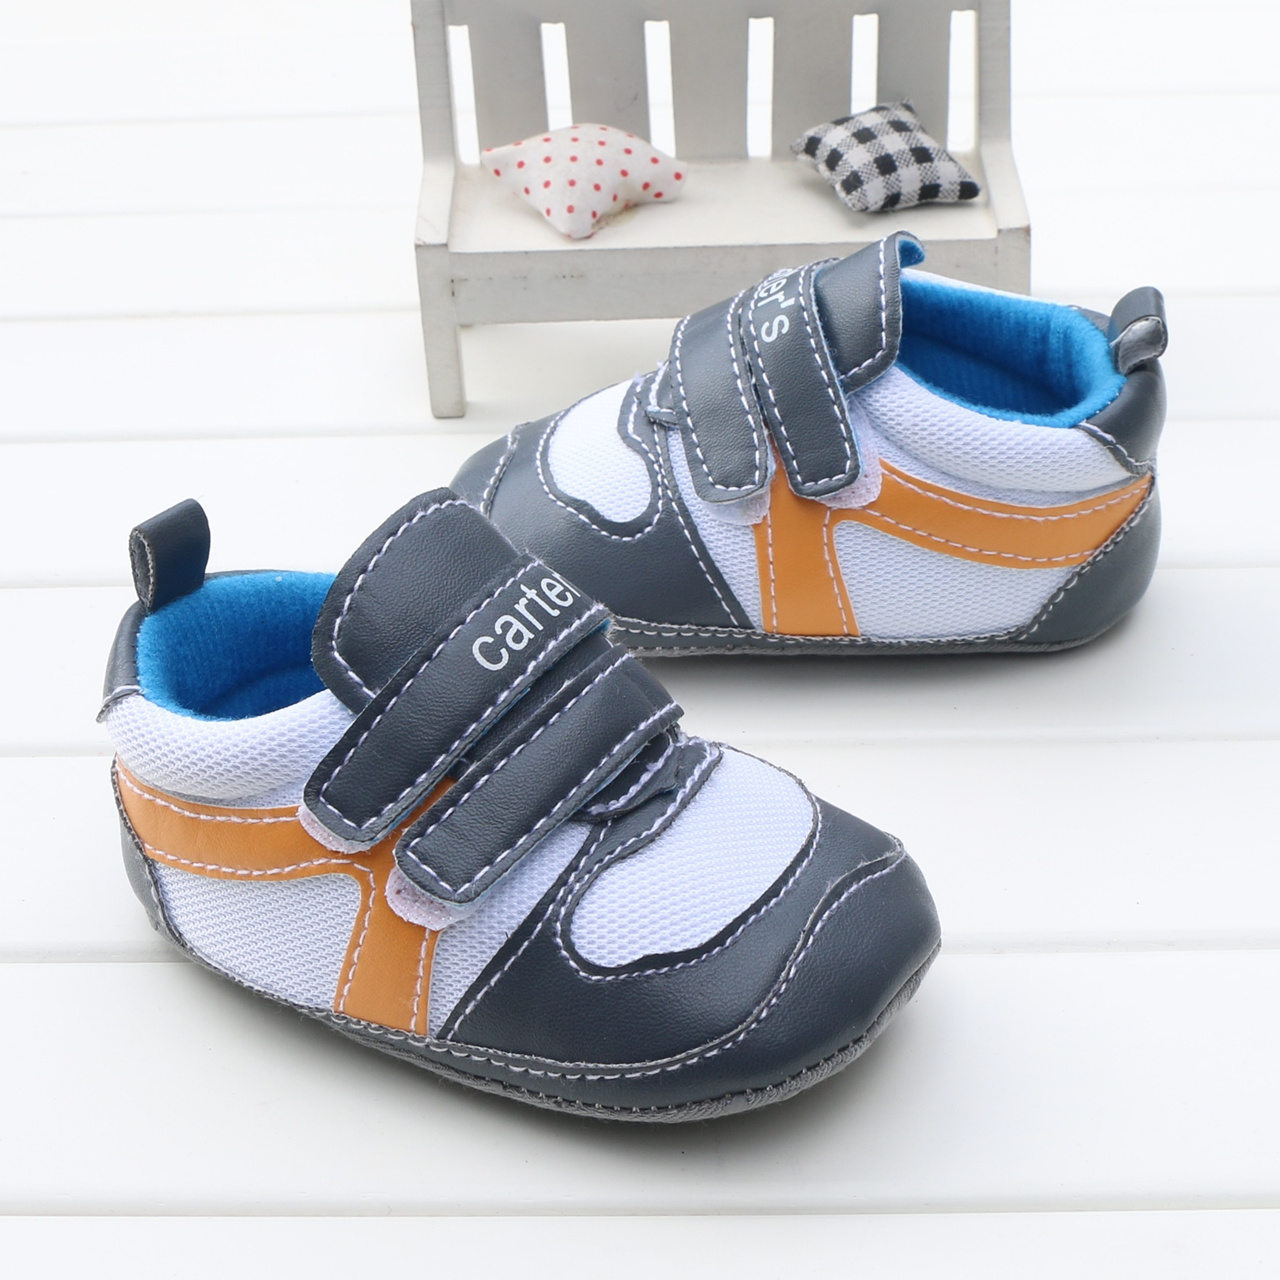 carters baby shoes